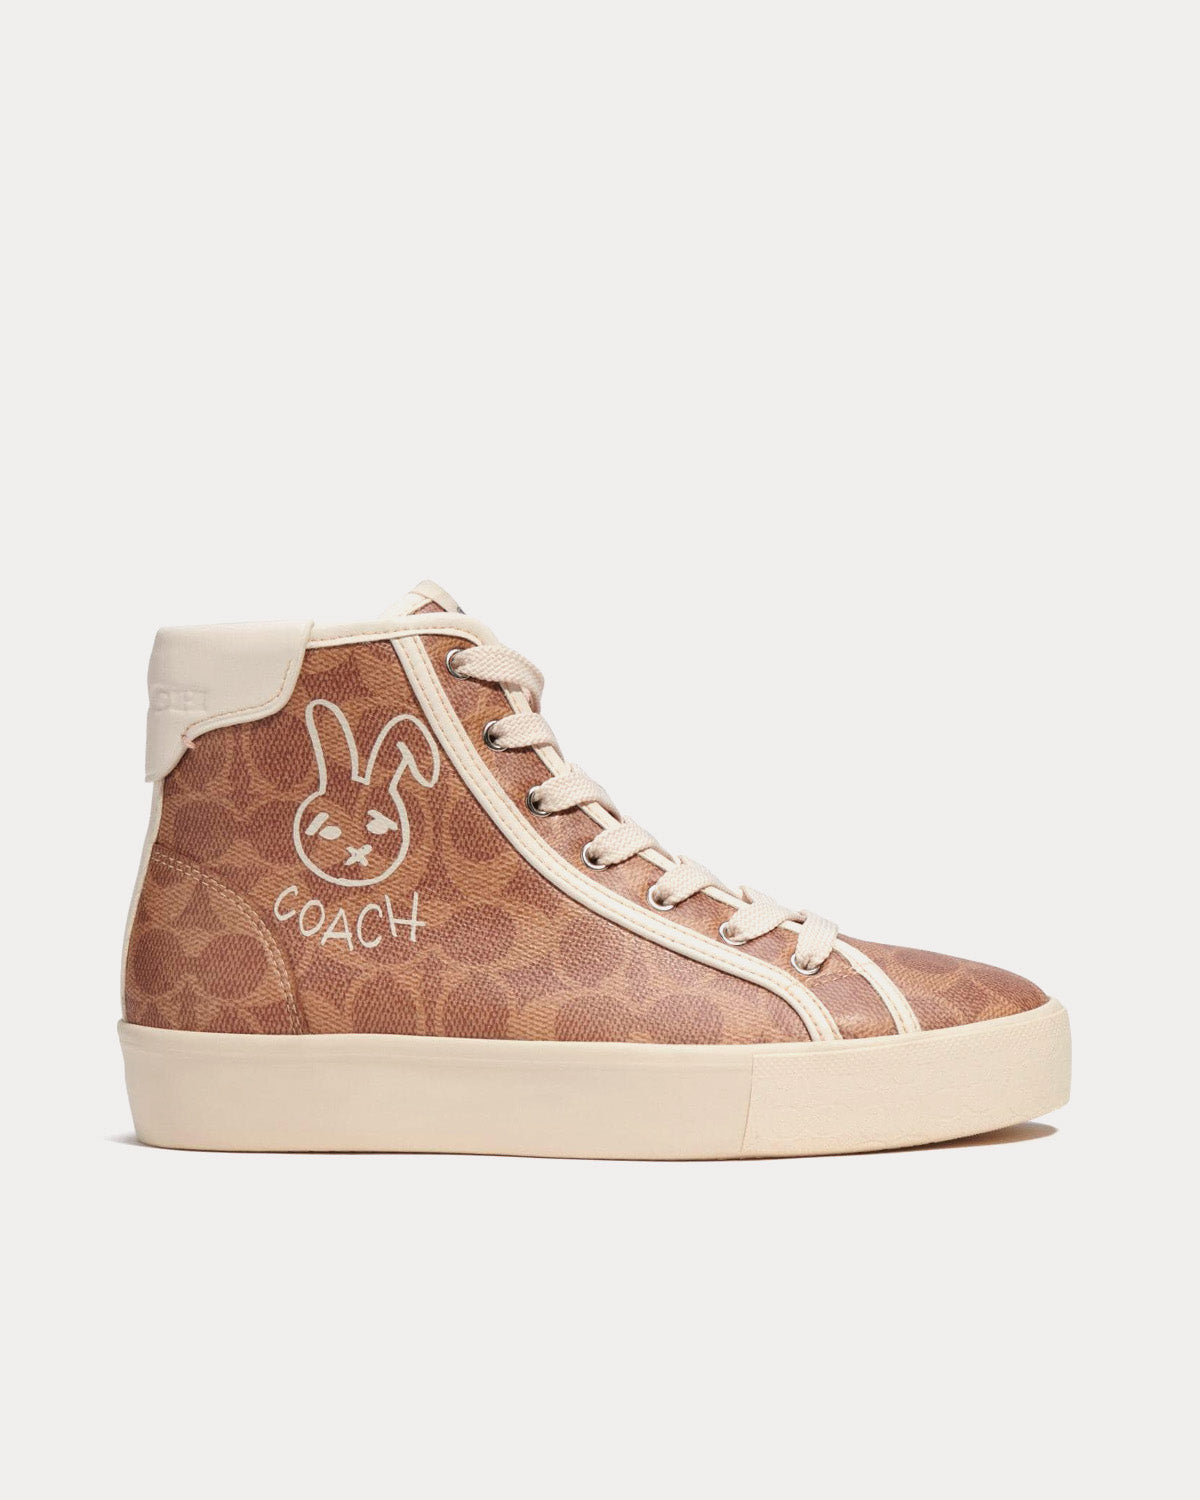 Coach - Lunar New Year Citysole In Signature Canvas With Rabbit Tan High Top Sneakers